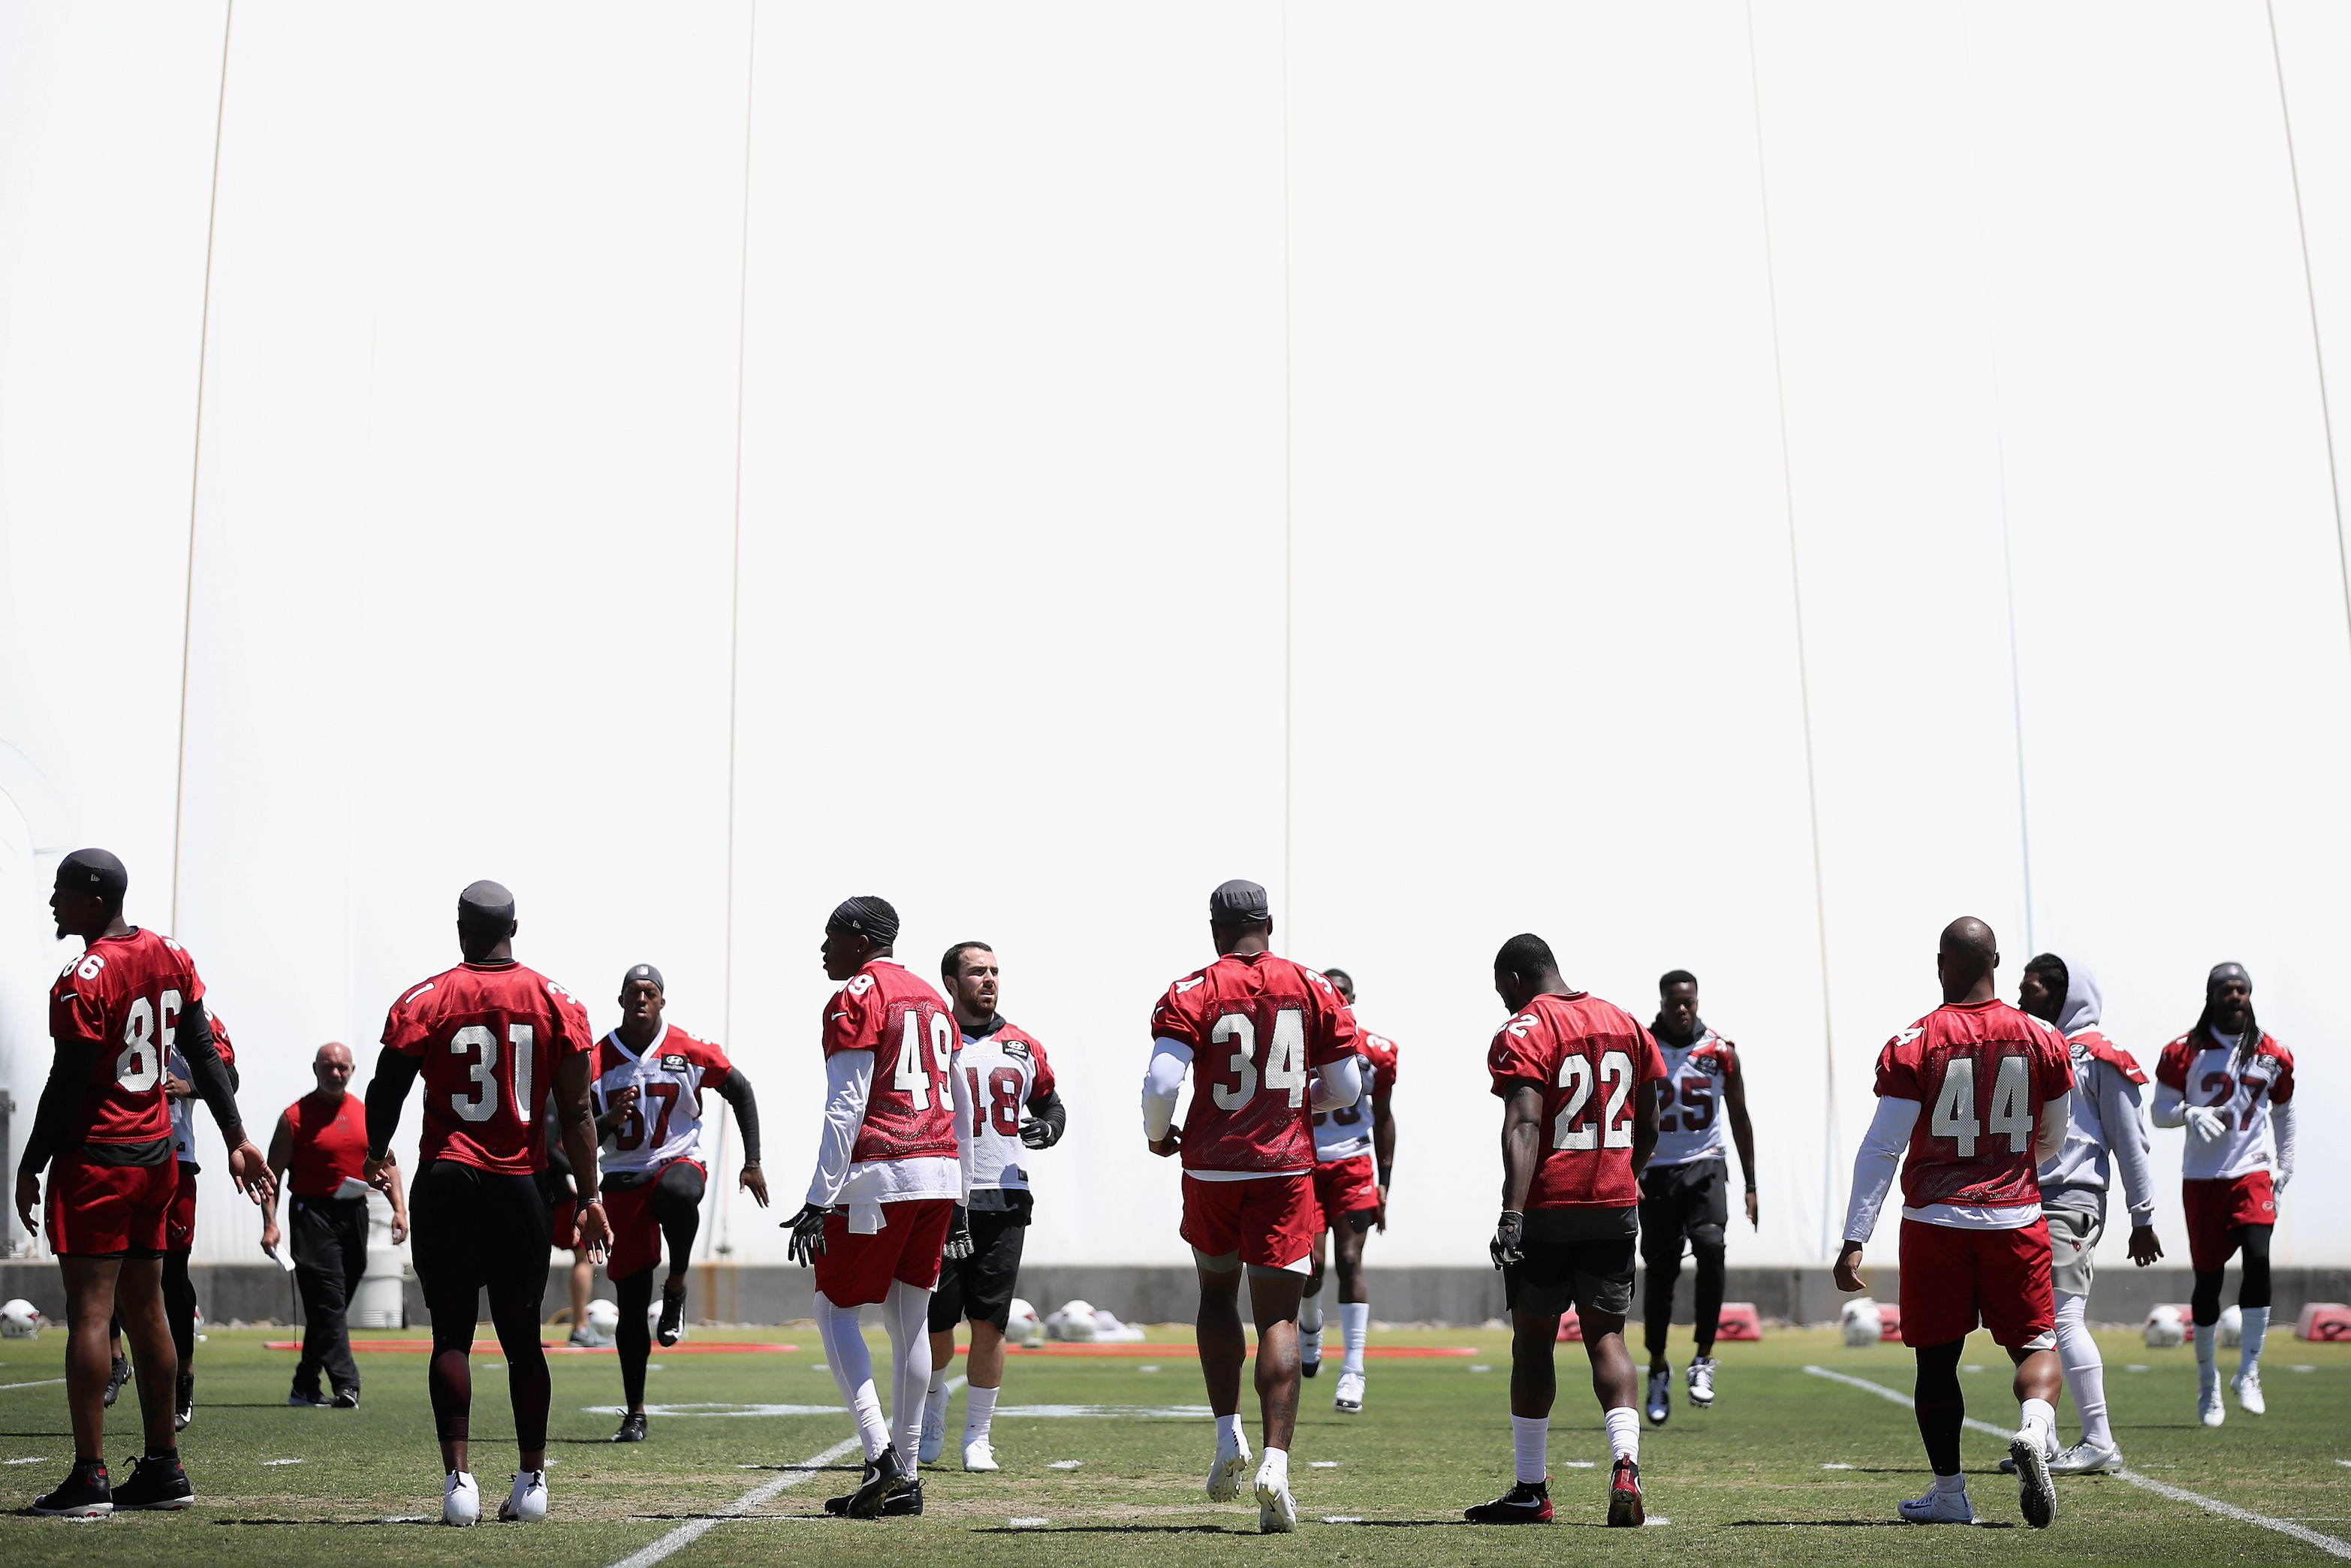 The Arizona Cardinals doing OTA's at the Dignity Health Arizona Cardinals Training Center. The NFLPA survey suggests that it "smells crazy in there."